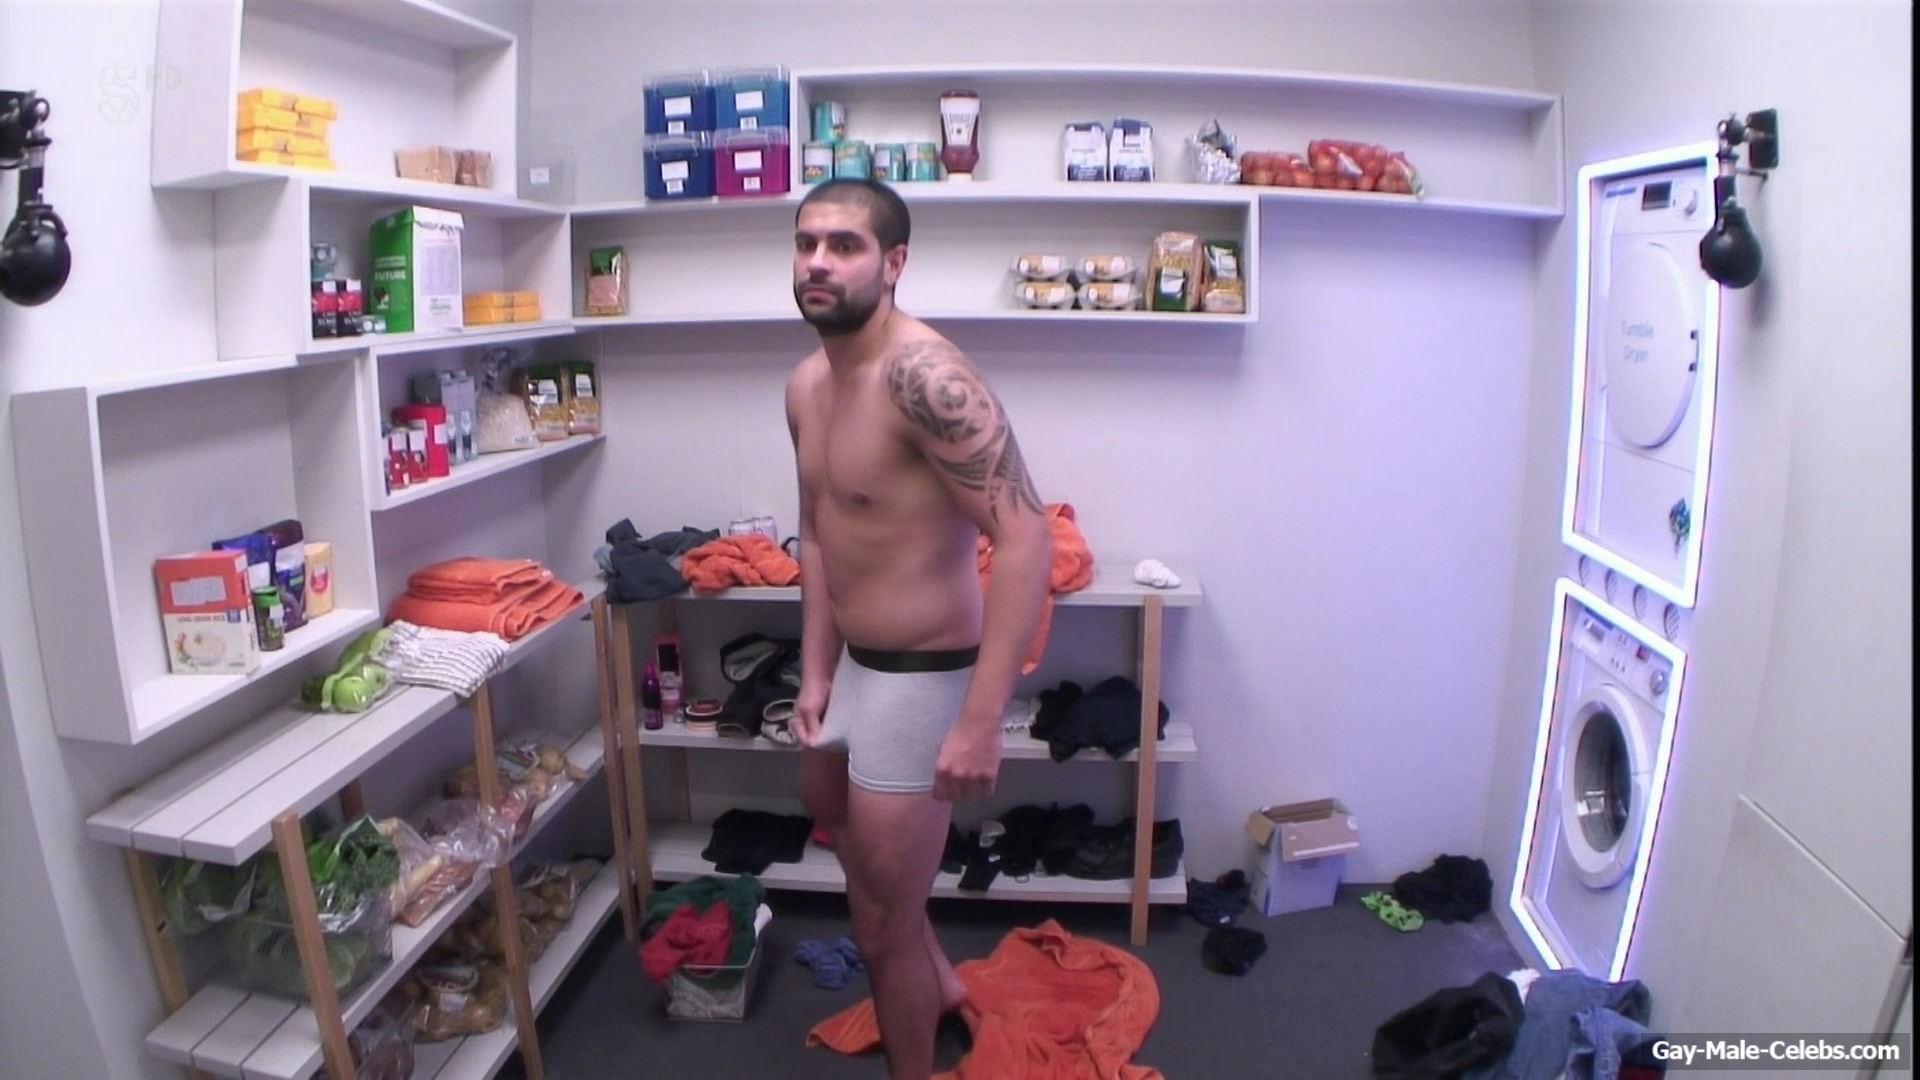 Big Brother’s Star Akeem Griffiths Flashing His Bare Ass